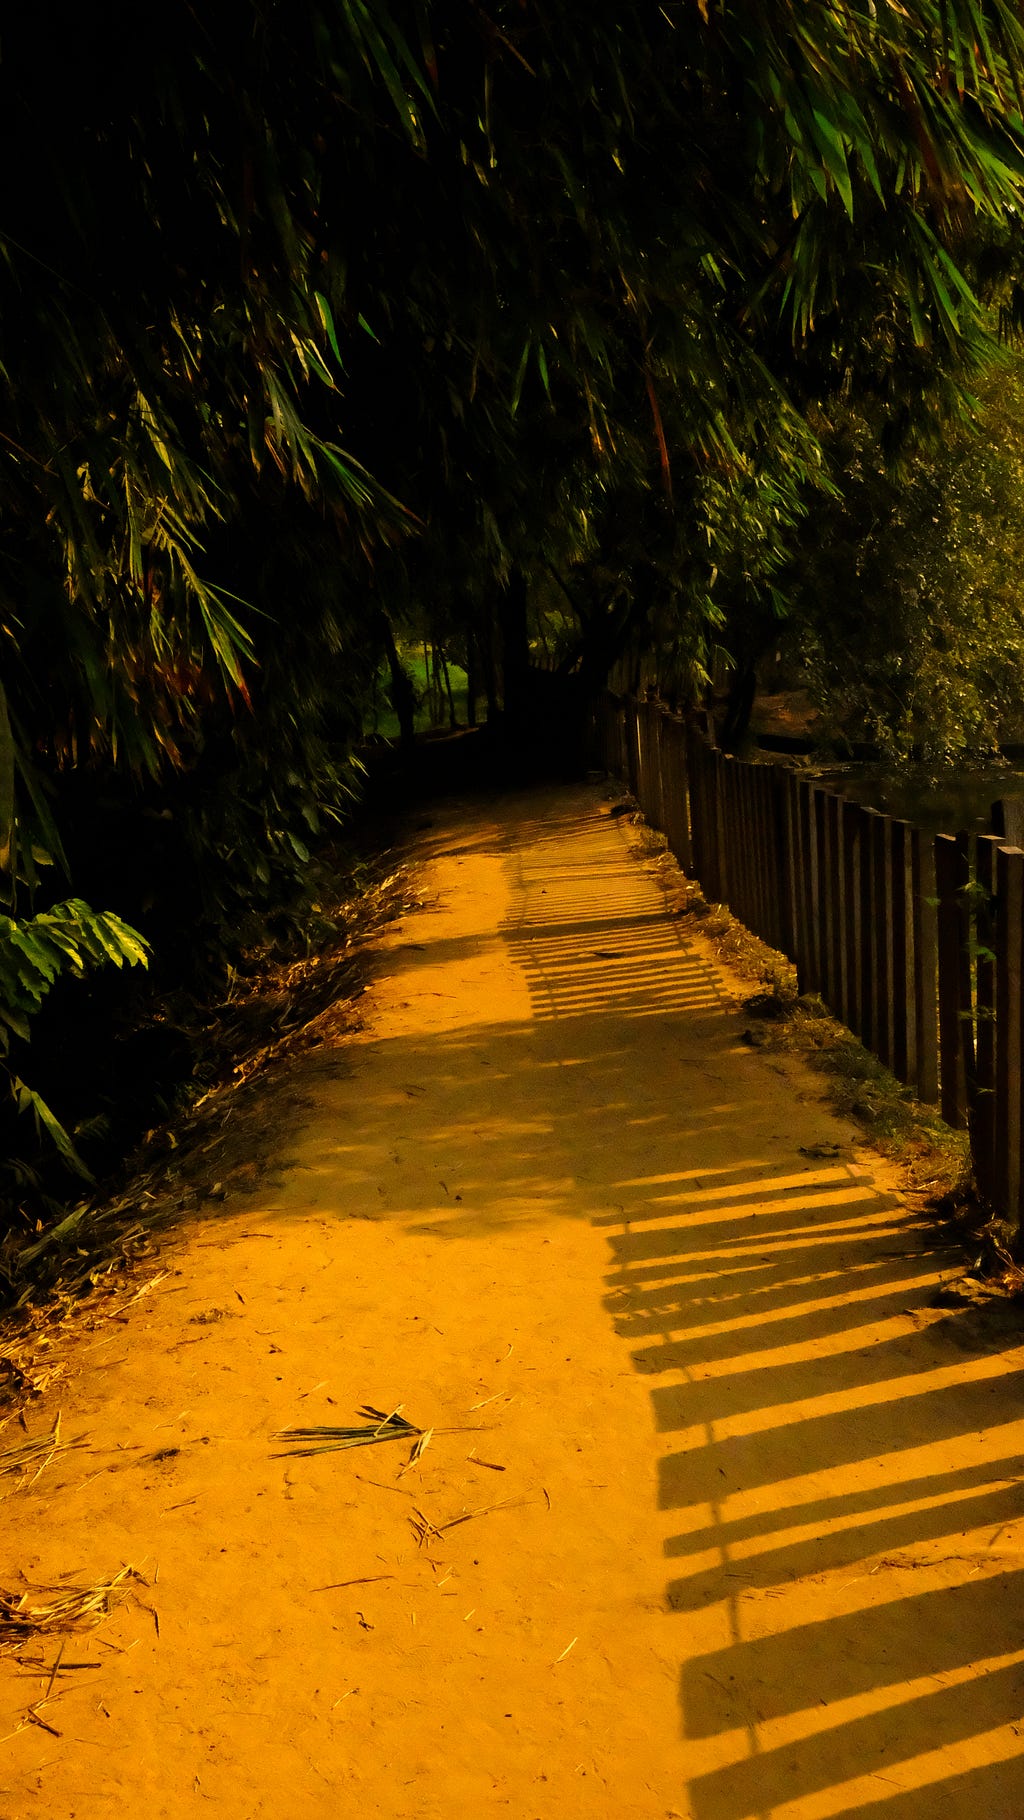 A dirt path surrounded by bamboo trees and a bamboo fence. The dirt path is covered with the shadows of the trees and fence